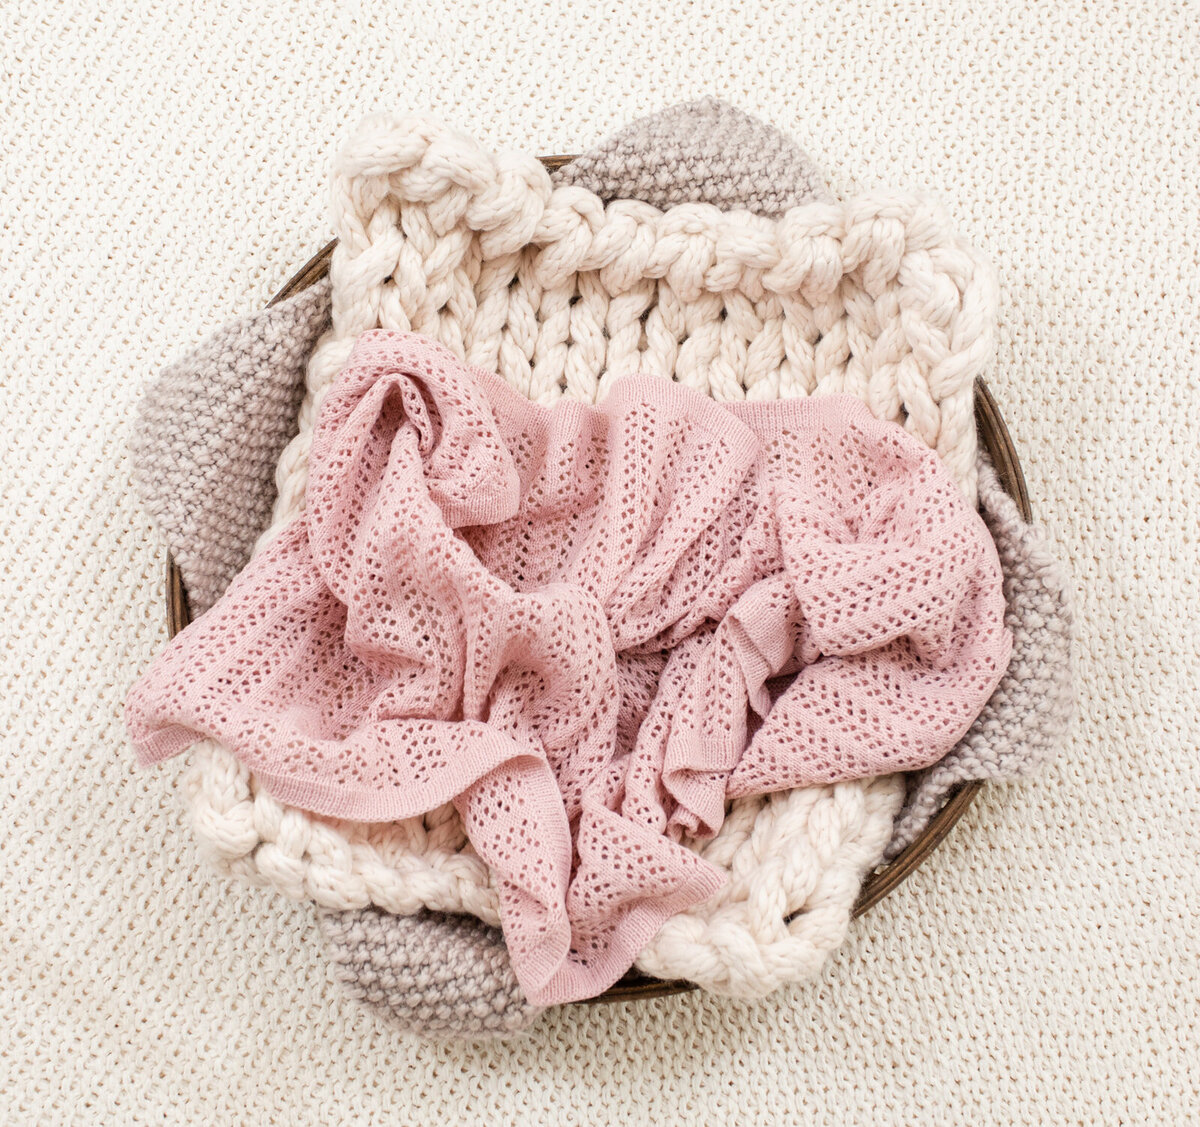 Newborn Props set-up including basket, blanket & wraps by laure photography | 05